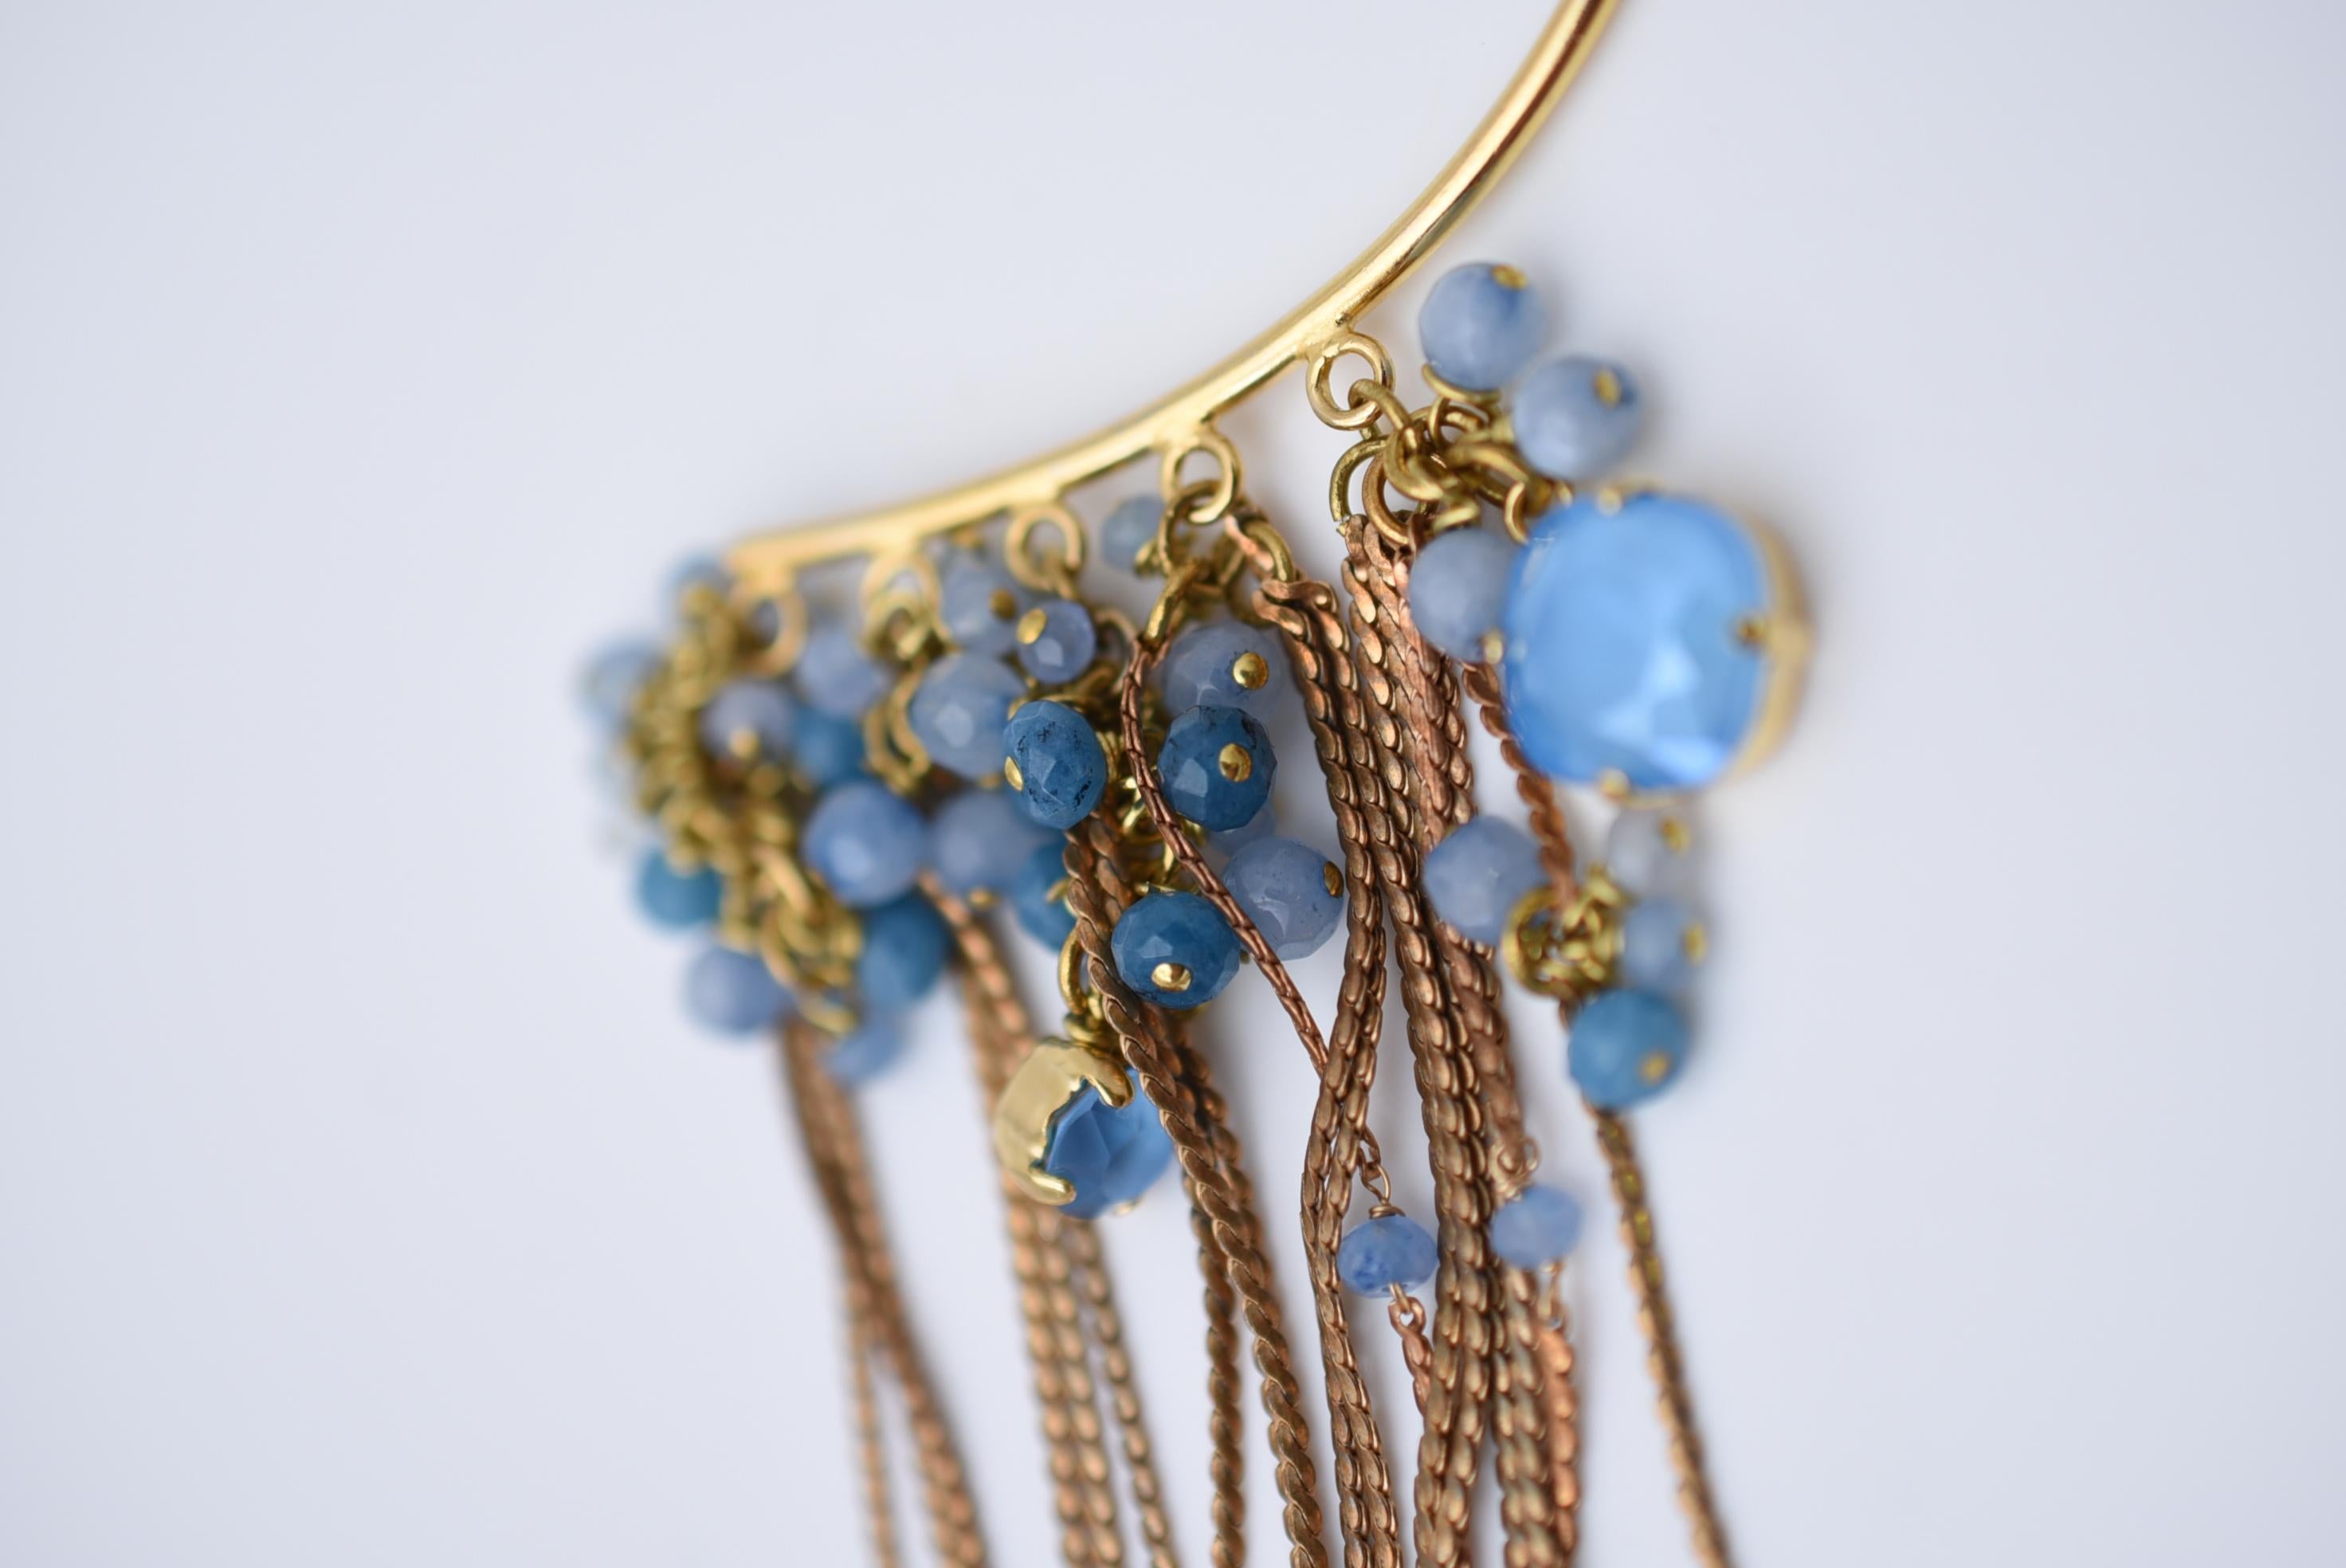 material:Brass, Blue Jade, Aquamarine, Swarovski
size:length 41cm


The ear cuffs can be adjusted to fit your ears by gently bending the curves of the ear cuffs.

This series is designed with a fresh blue muscari motif.
The smoothly extending stems